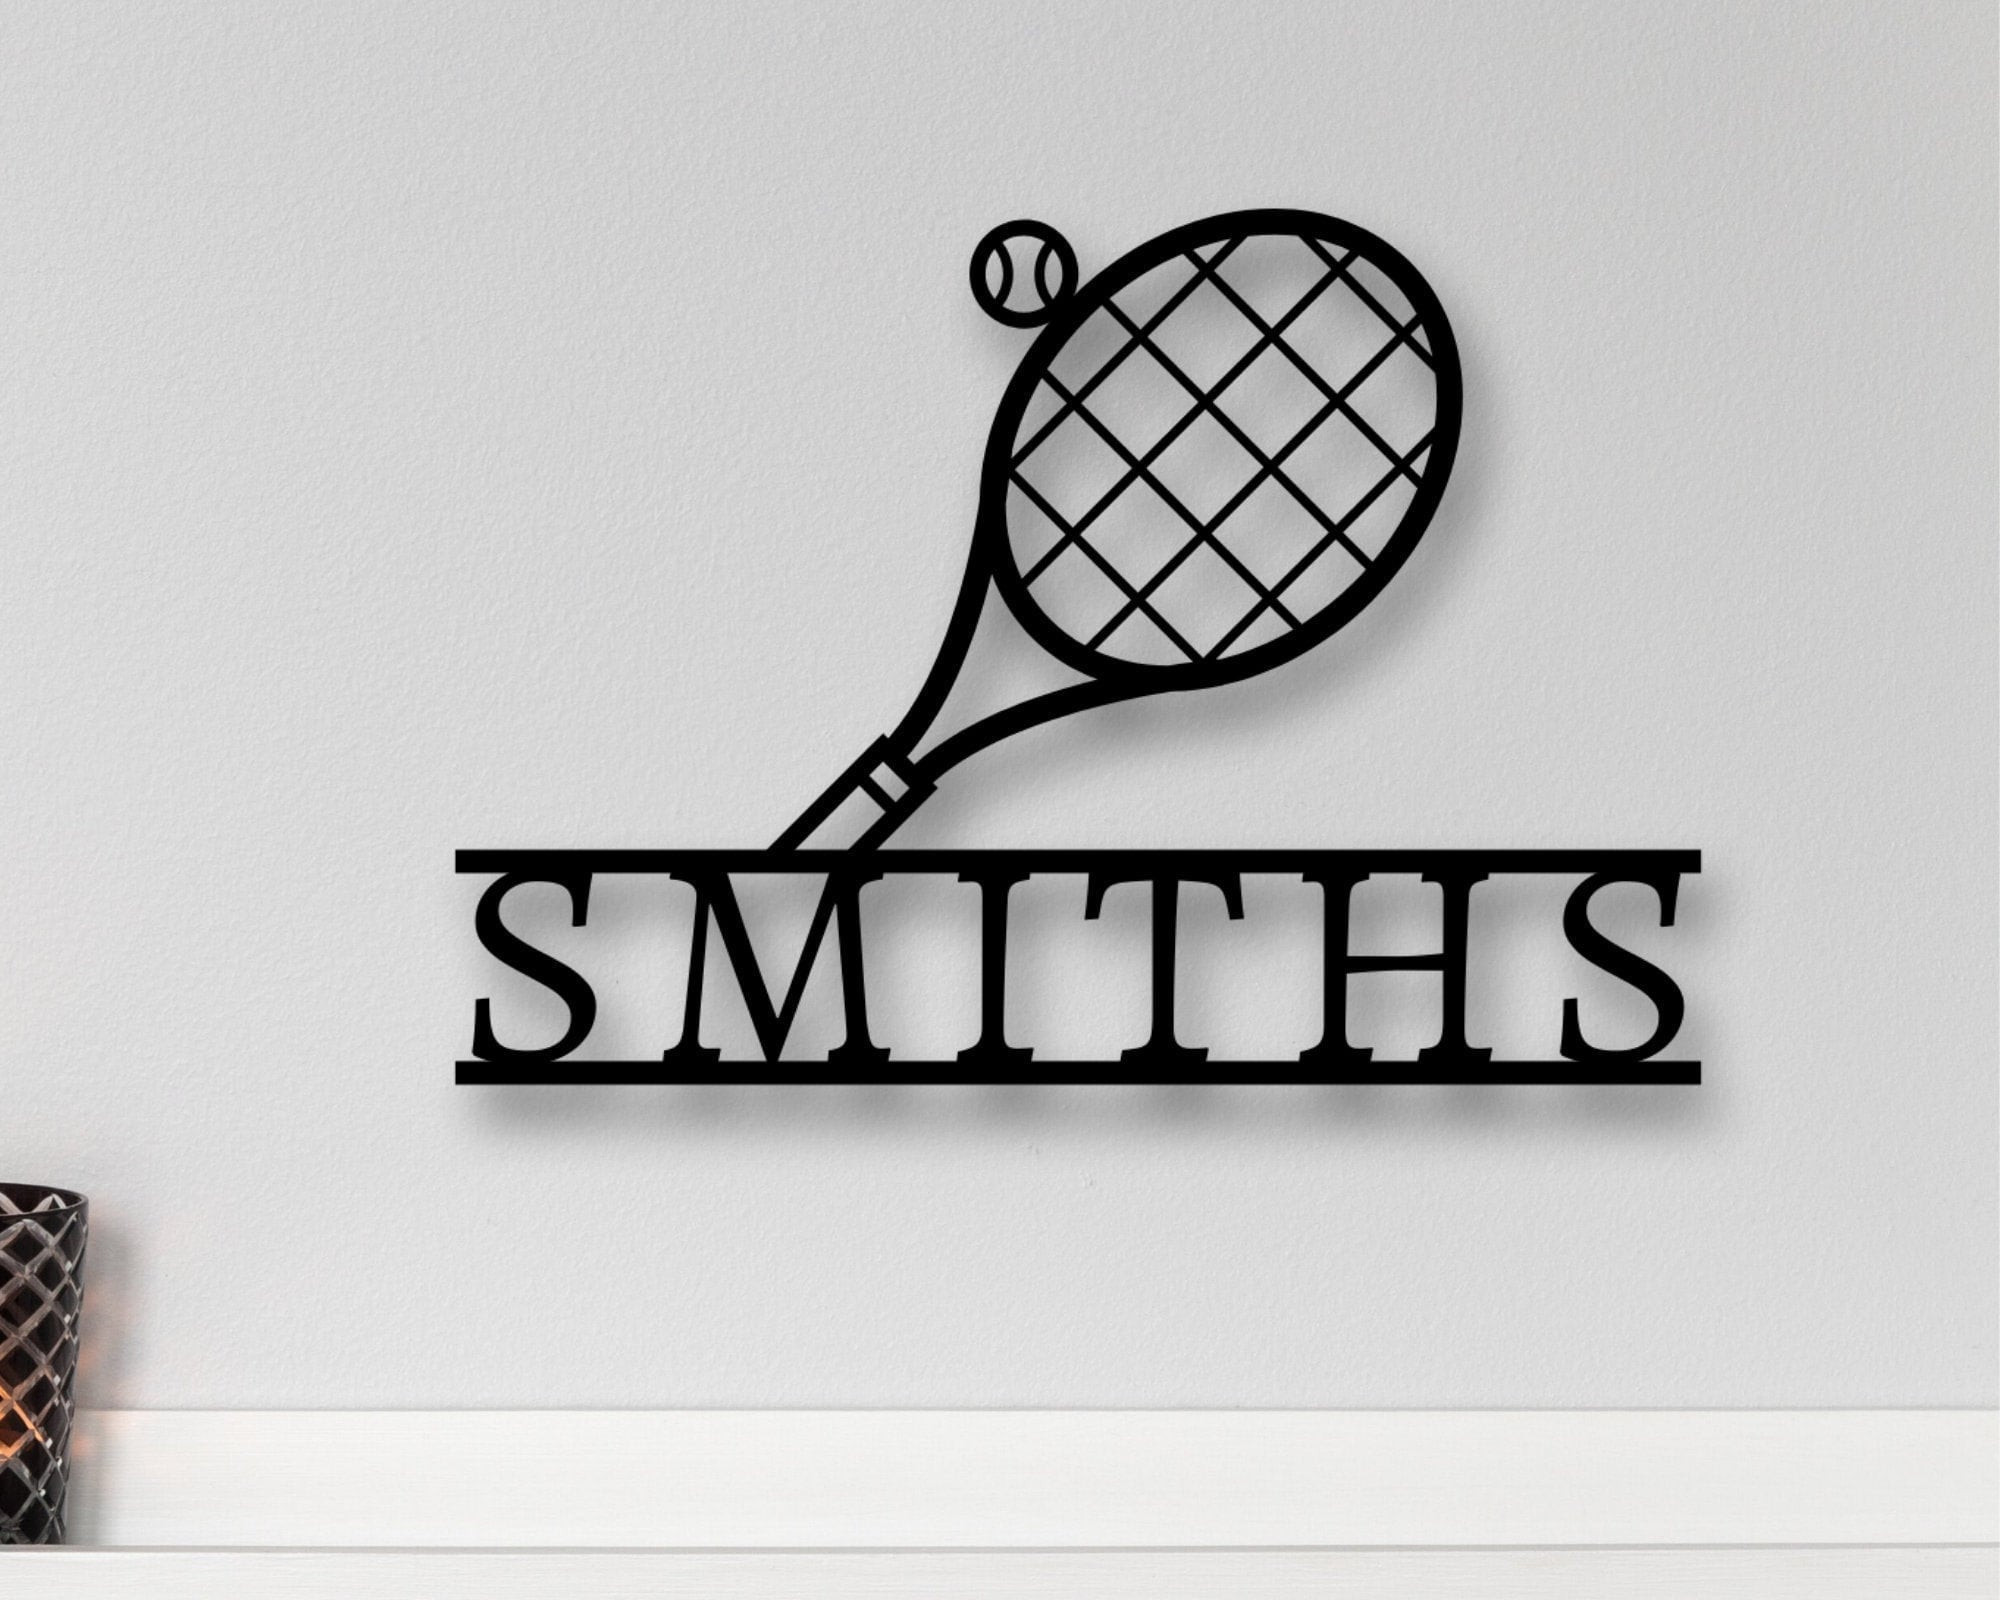 Christmas Gift, Personalized Tennis Sign, Metal Tennis Wall Art, Tennis Sign, Tennis Metal Sign, Tennis , Metal Wall Art, Sport Sign, Per, Laser Cut Metal Signs Custom Gift Ideas 12x12IN